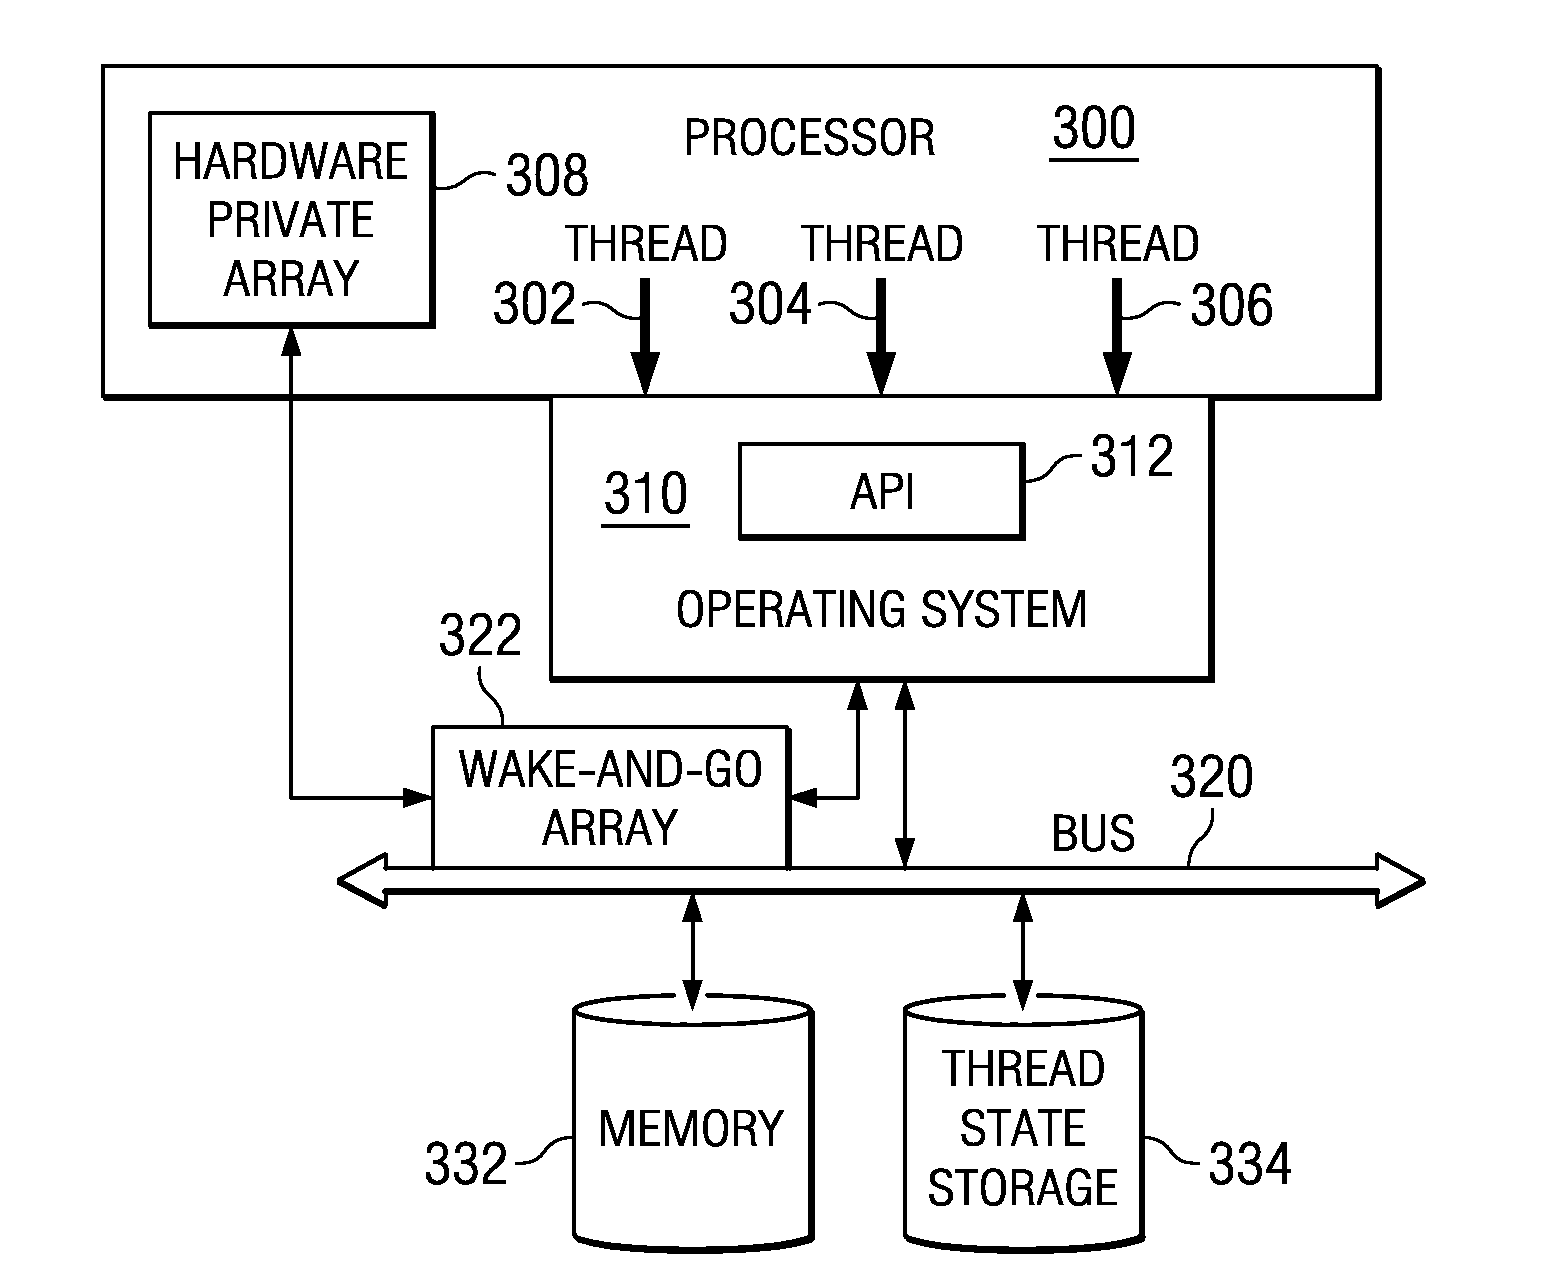 Wake-and-Go Mechanism With Software Save of Thread State